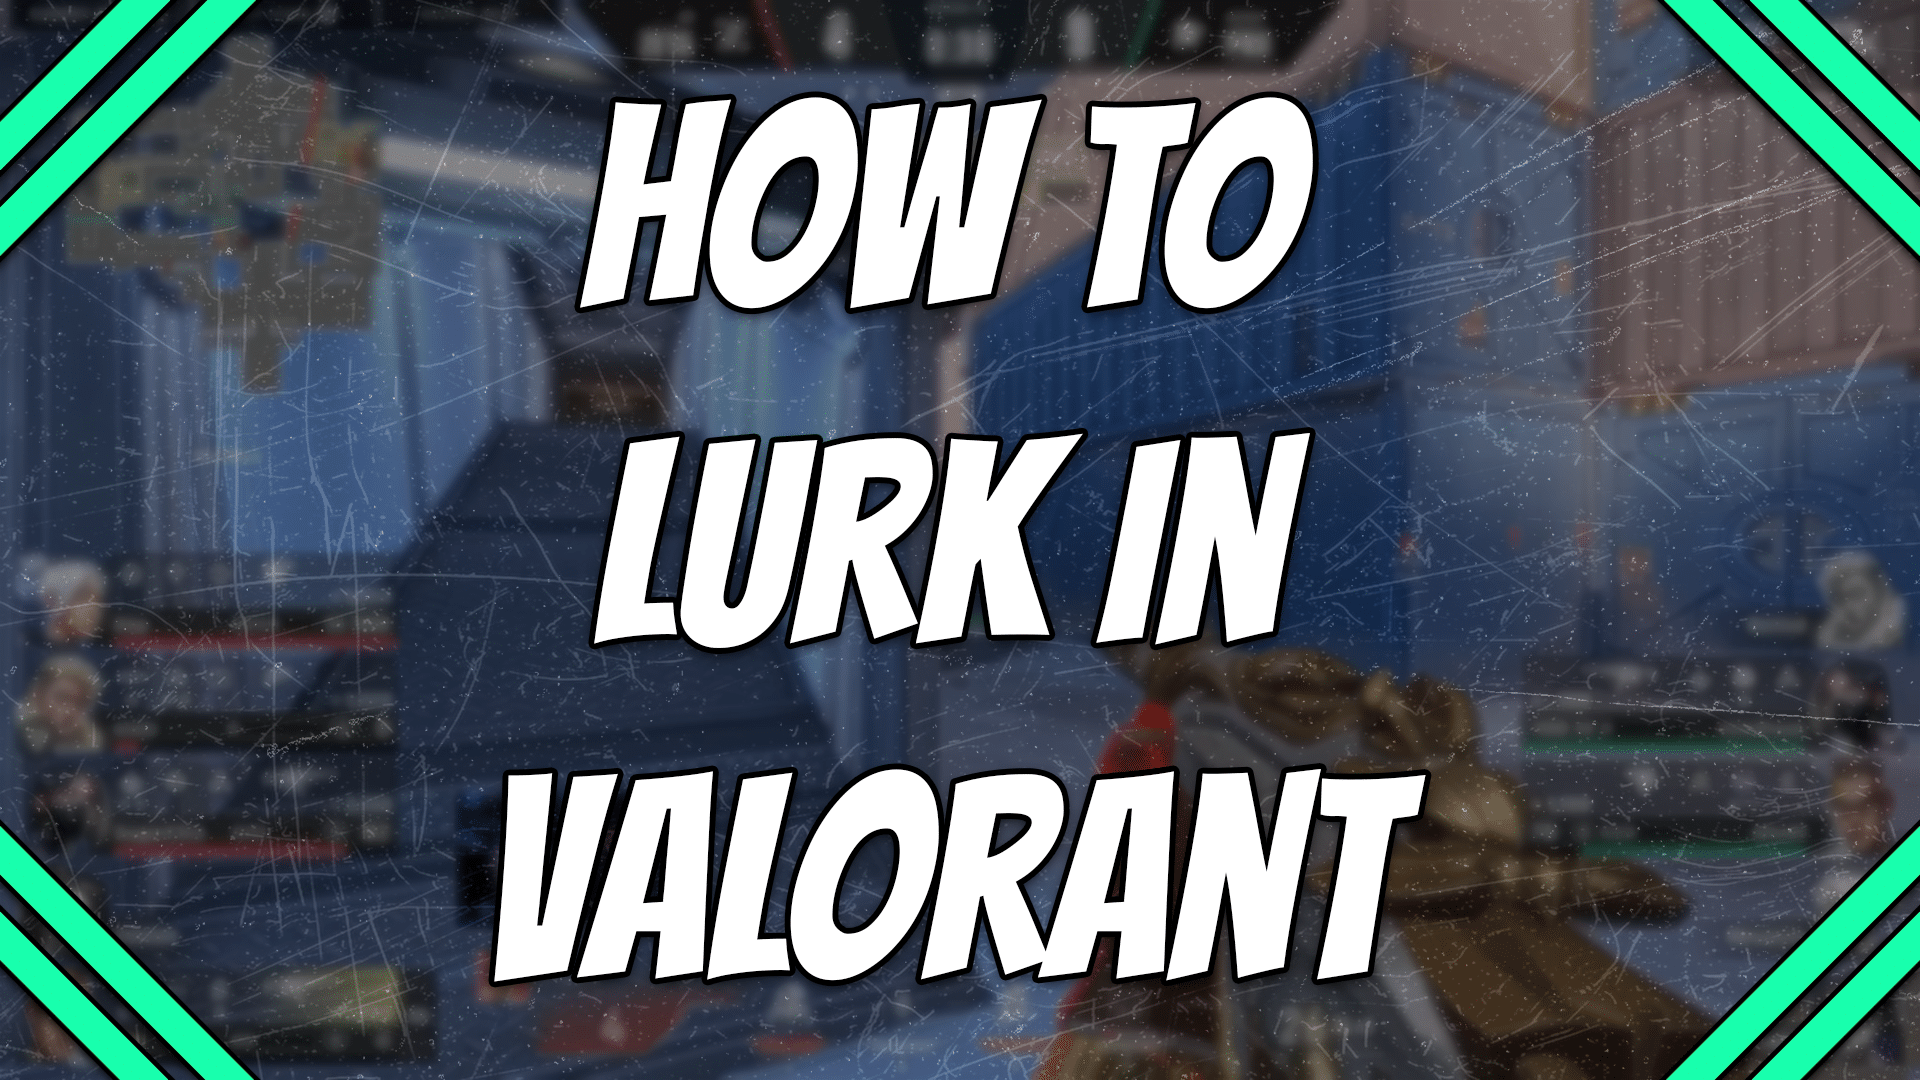 How to lurk in Valorant title card